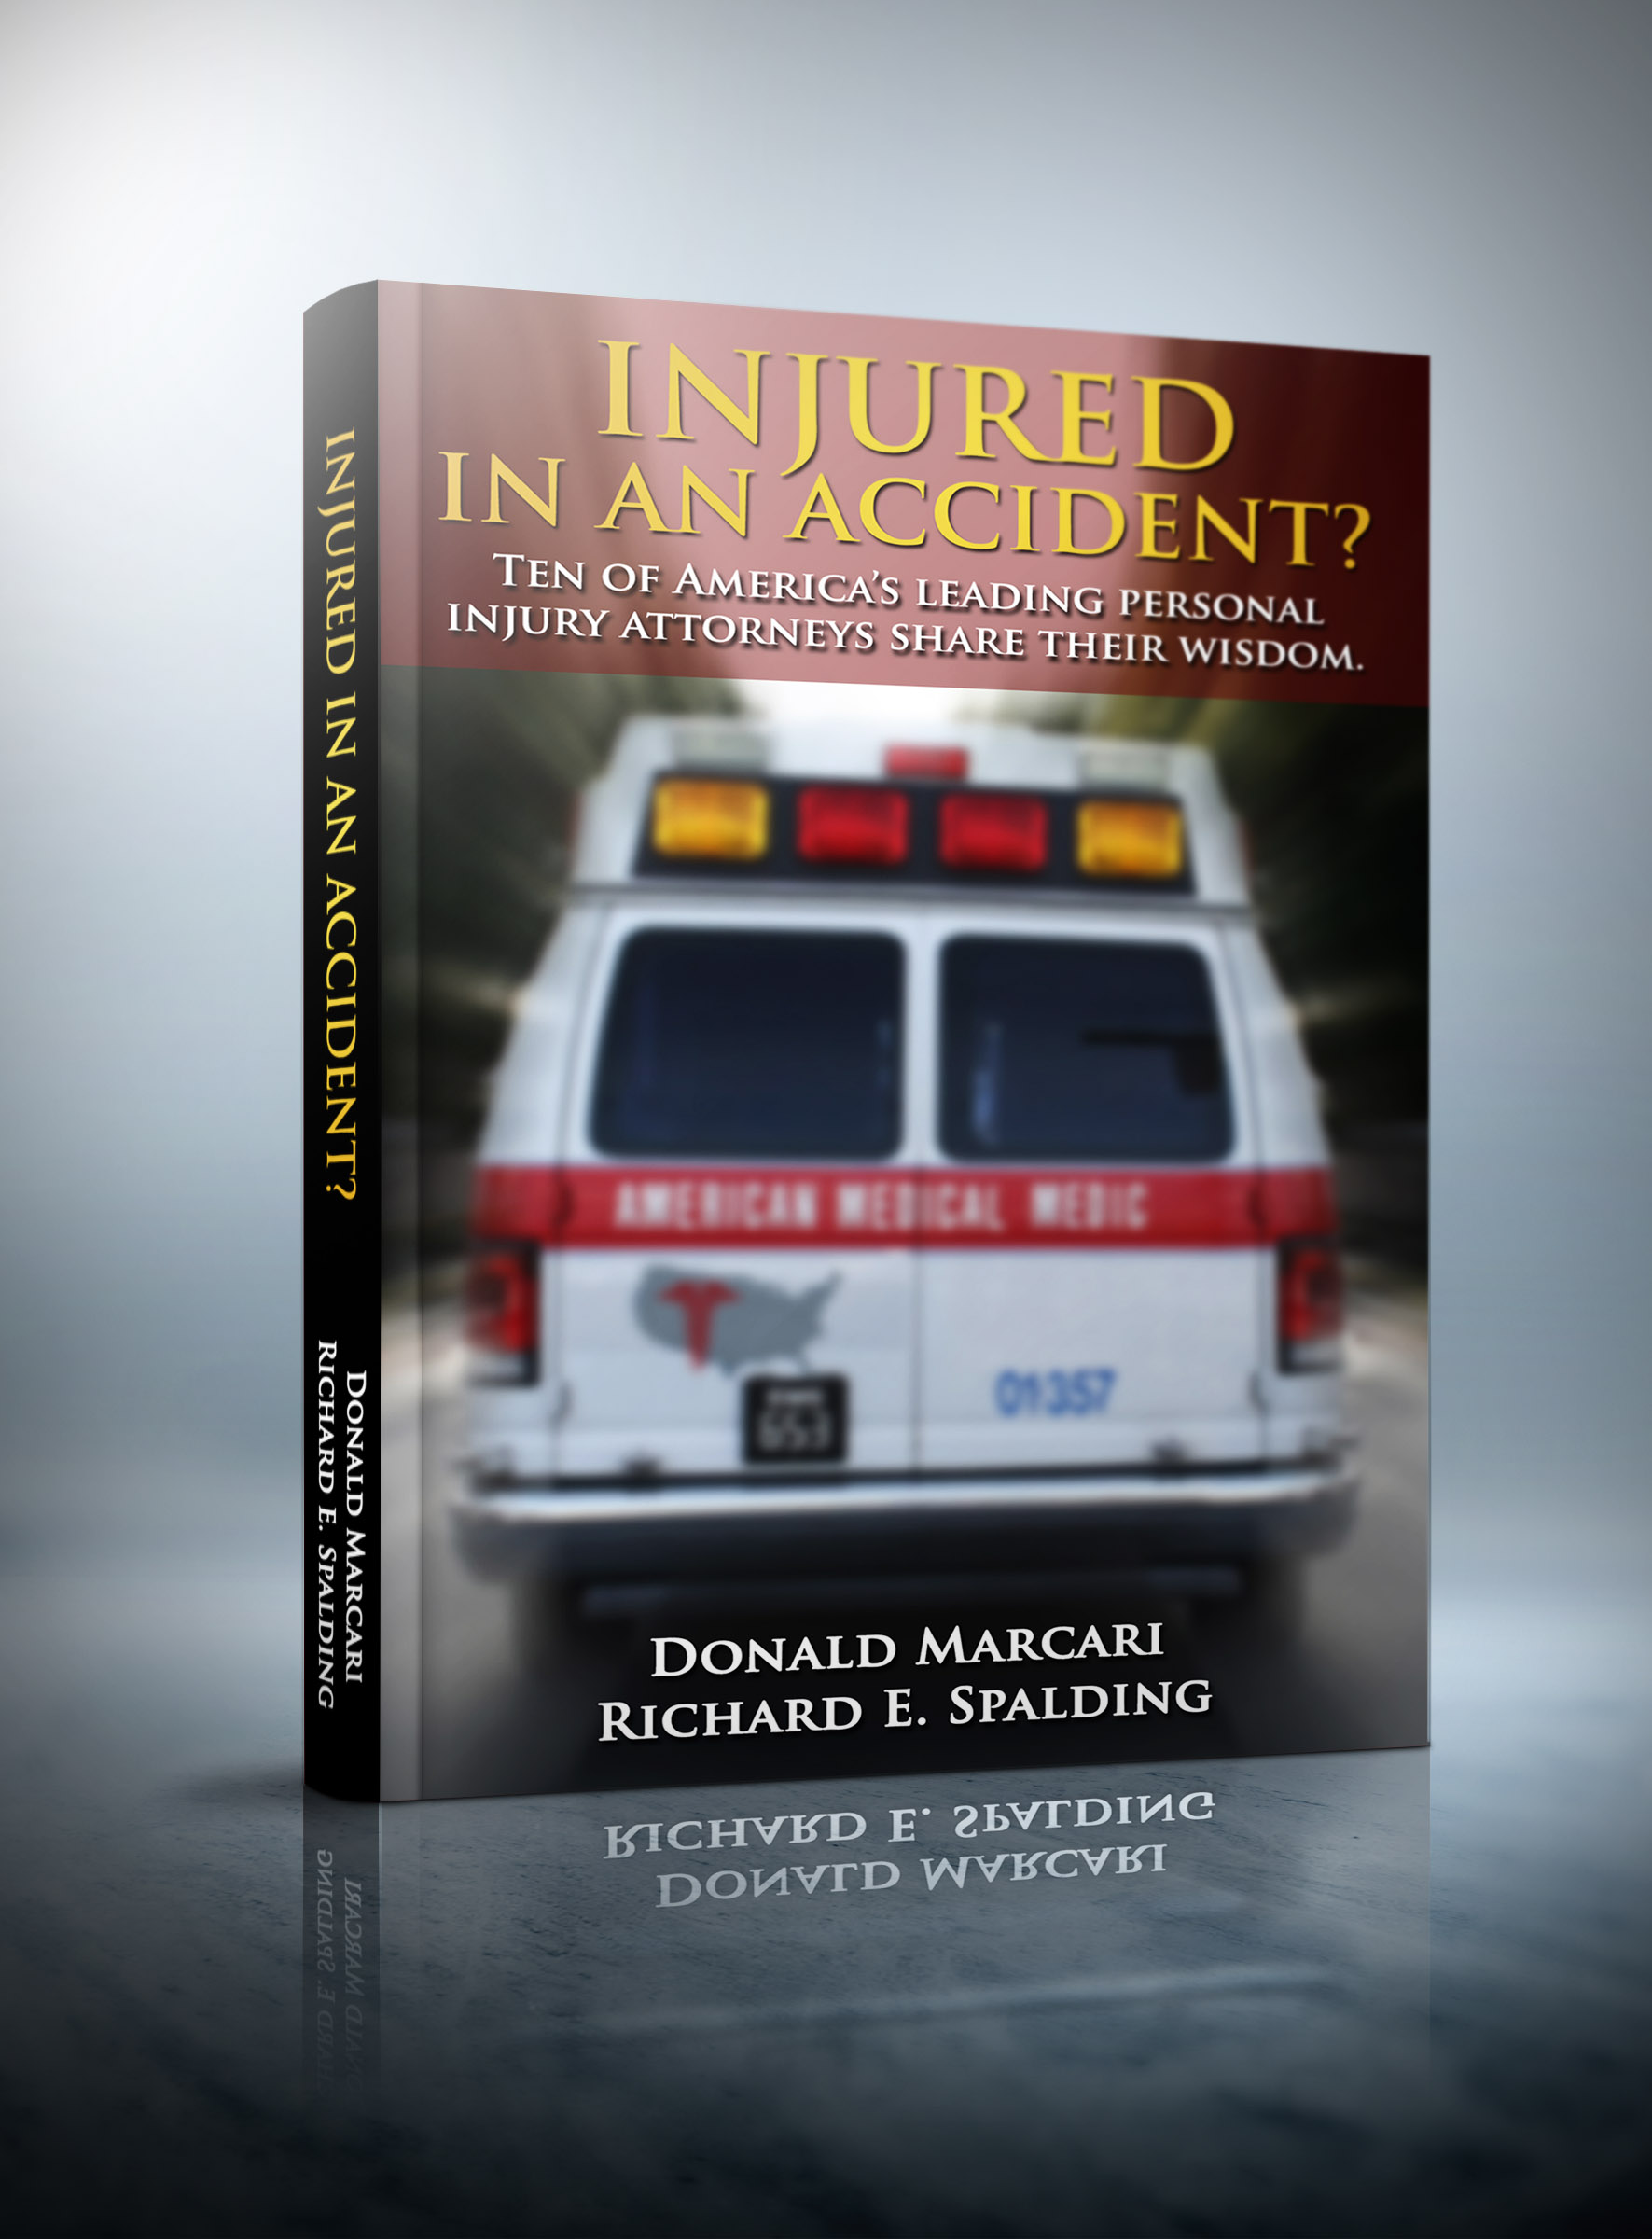 Rutherford Publishing House Introduces &ldquo;Injured in